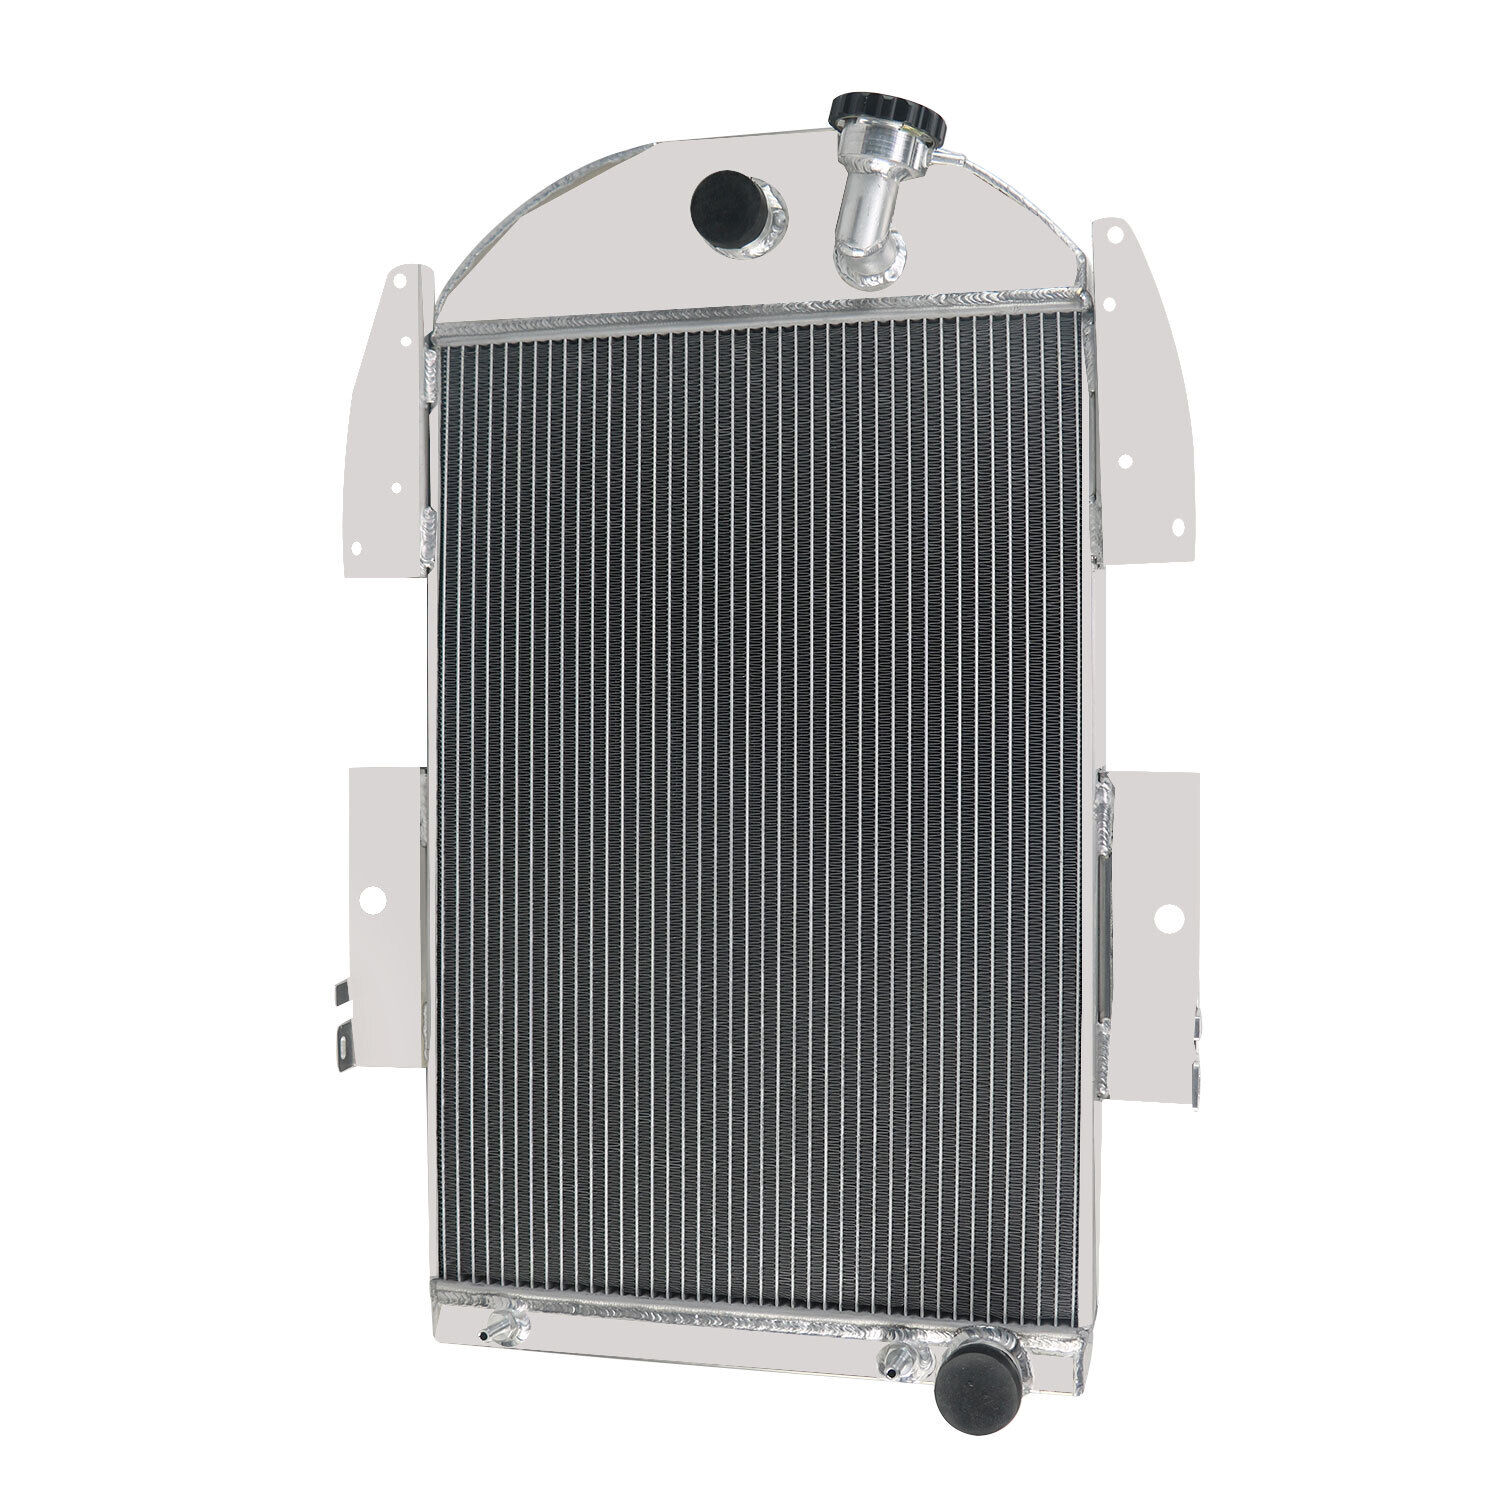 4 Rows Aluminum Radiator Fits 1934-36 Chevrolet Pickup Truck 6Cyl Chevy Engine.